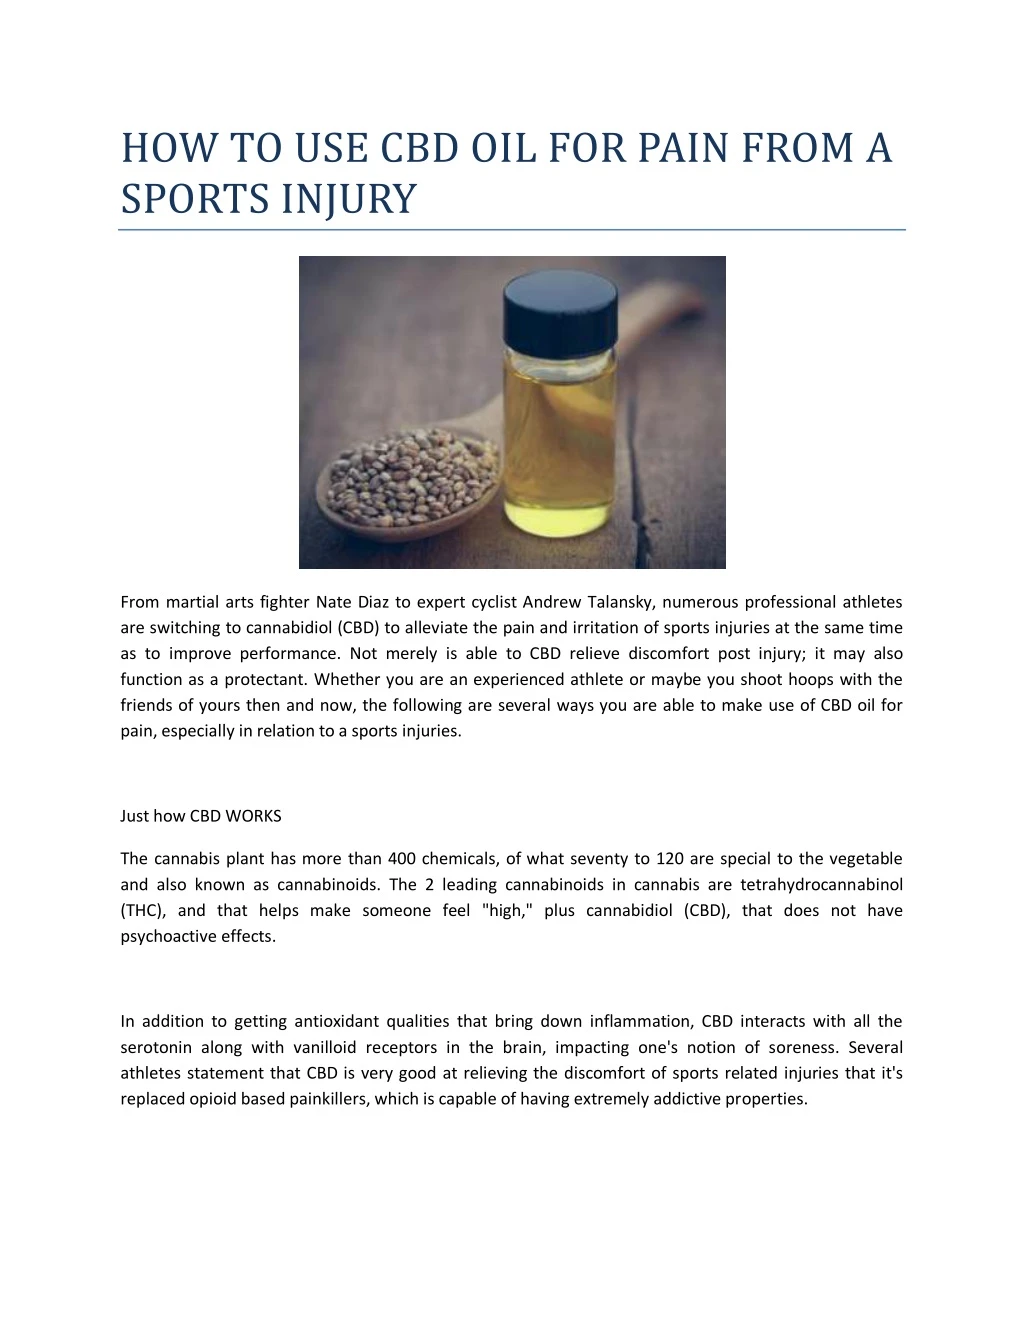 how to use cbd oil for pain from a sports injury